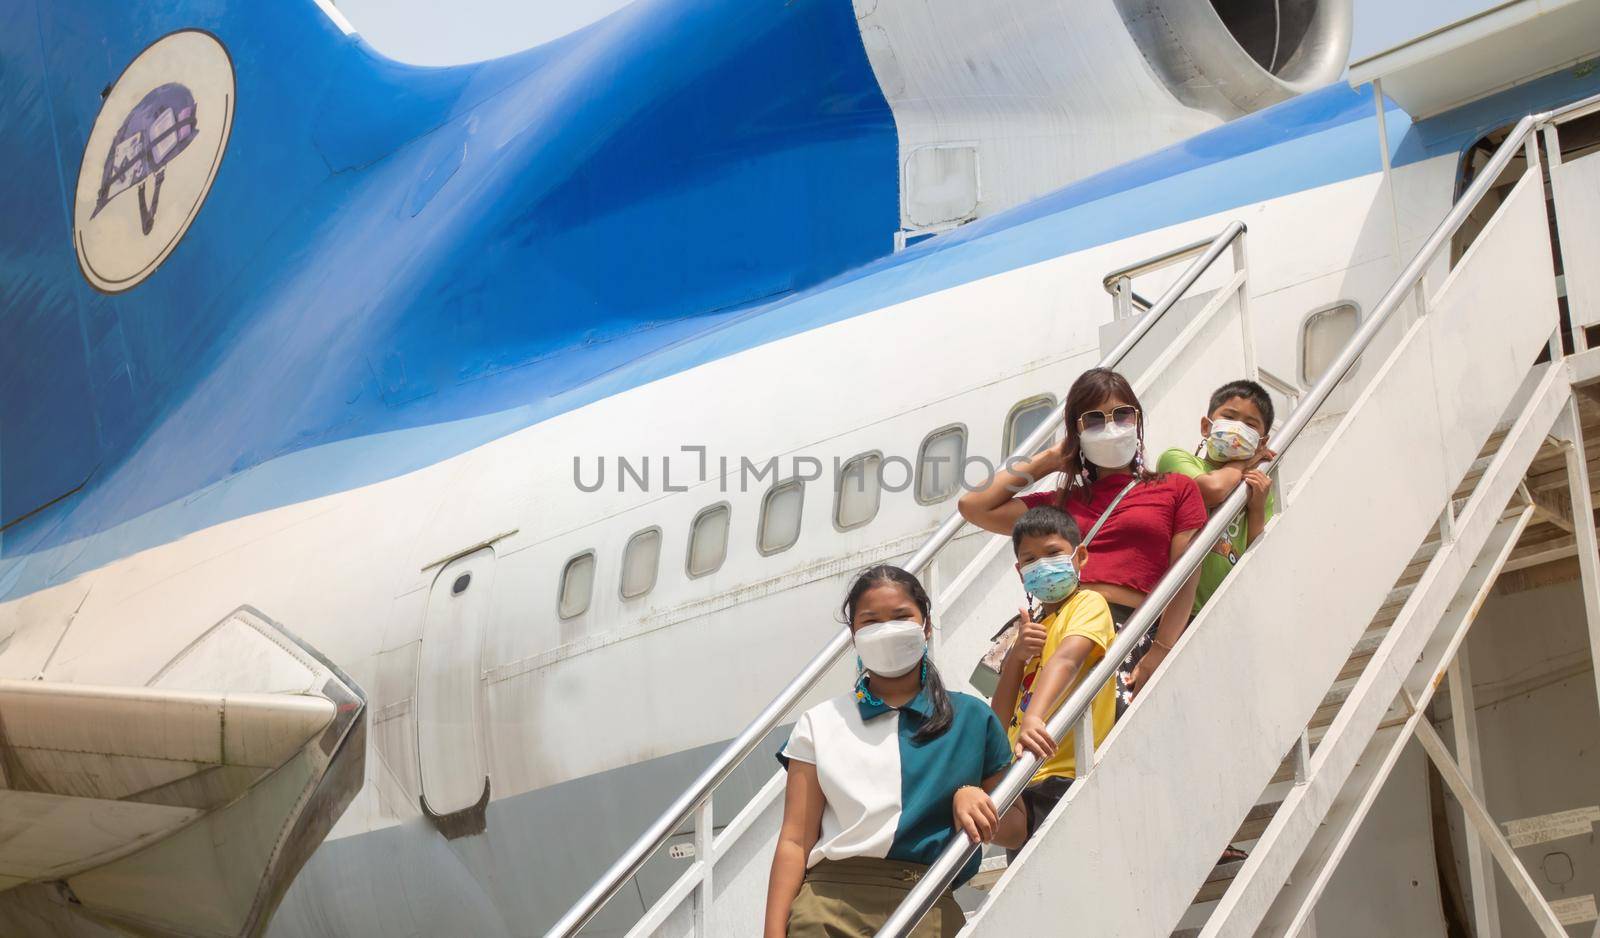 All the families were wearing masks to stand on the stairs for boarding the plane.